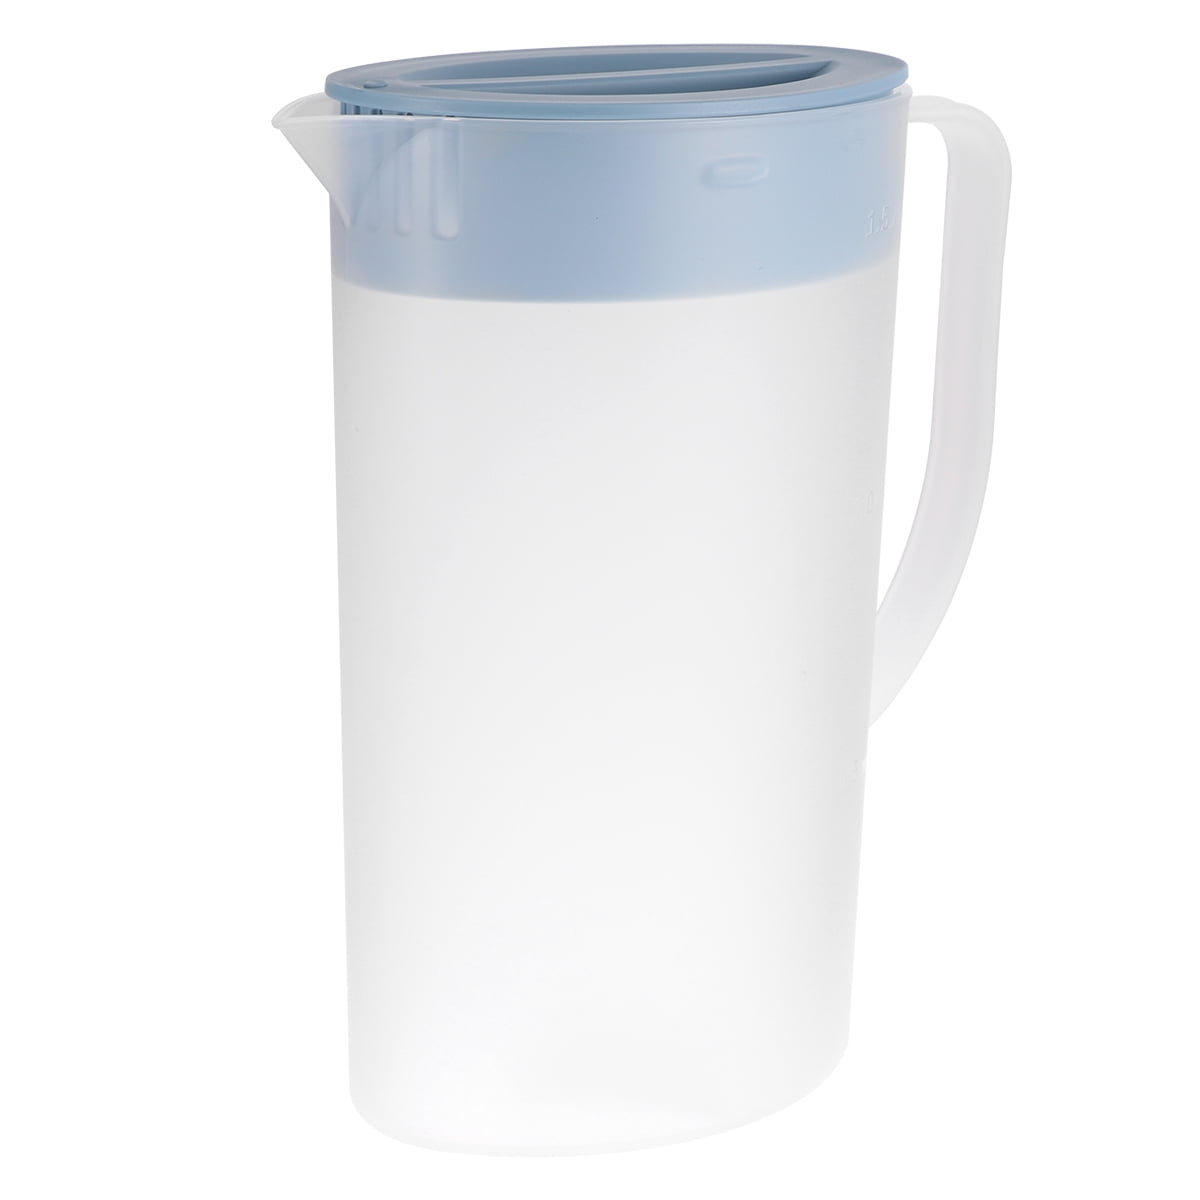 ReaNea 1800ml Plastic Water Pitcher with Lid and 3 Cups (Smoke Gray) 